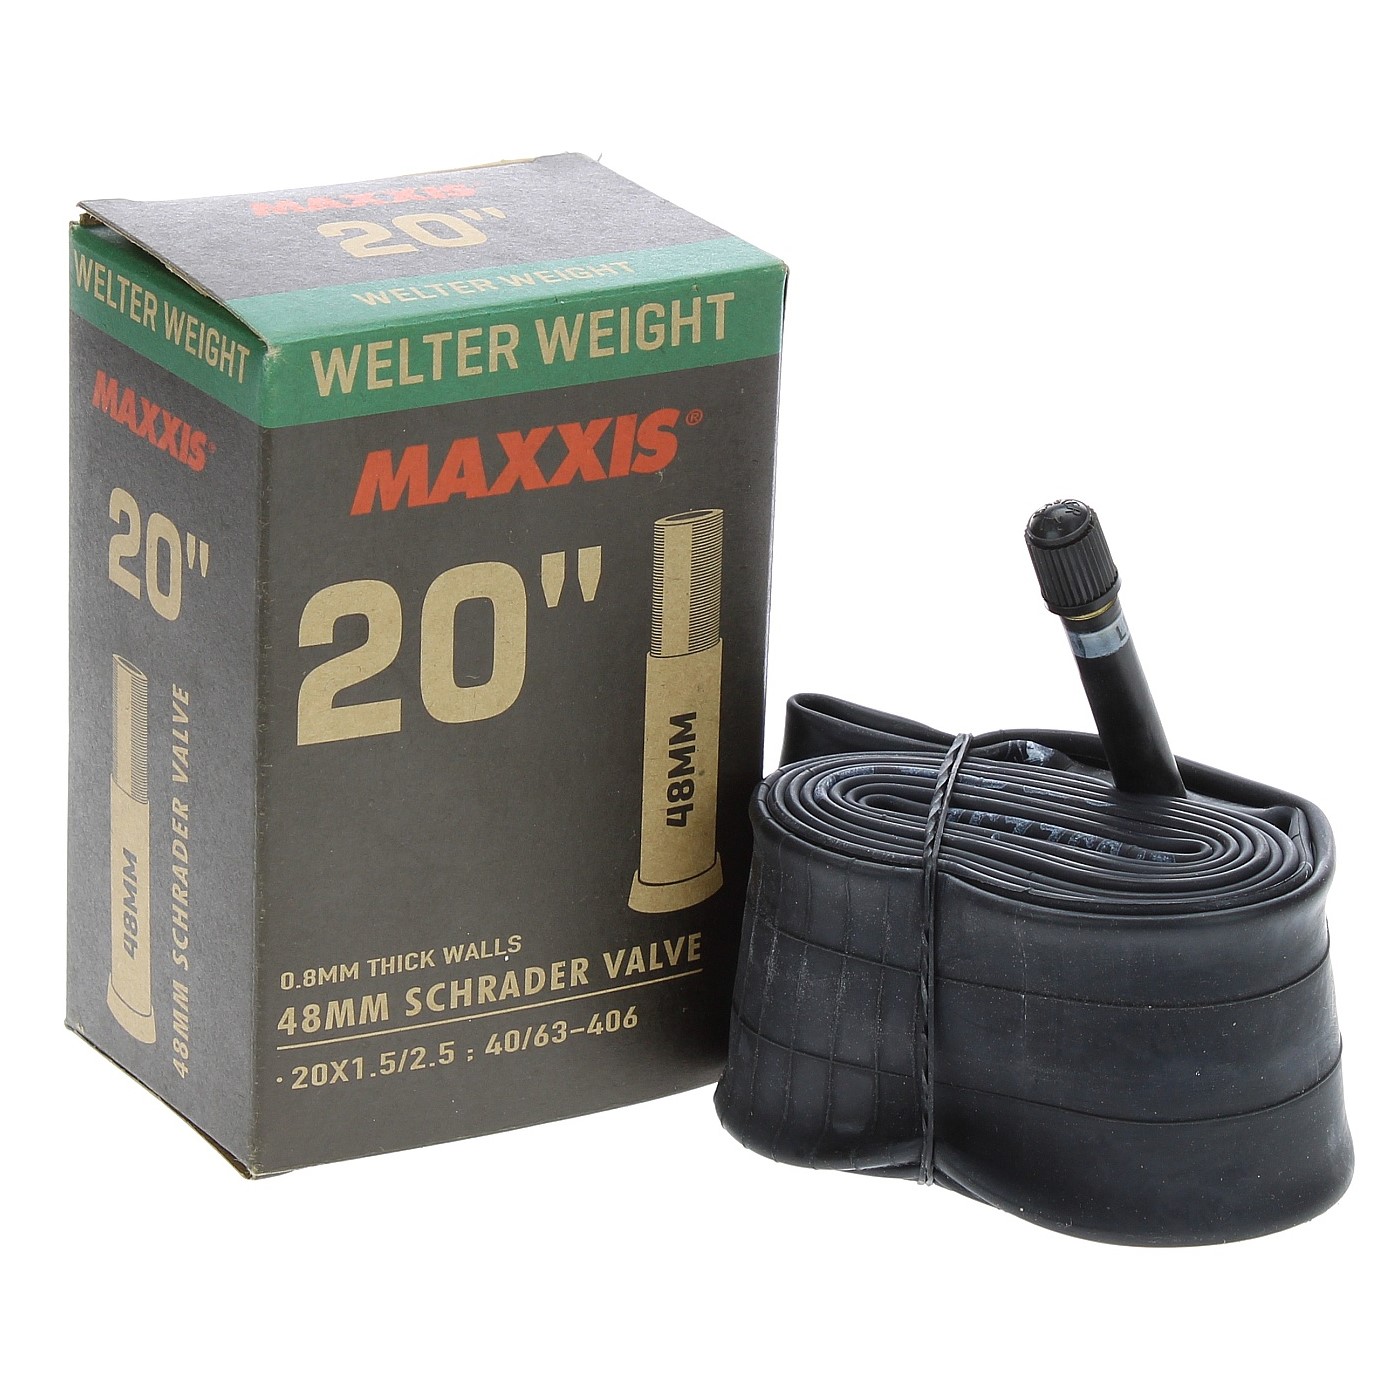 MAXXIS - duše WELTER WEIGHT AUTO-SV 20x1.5/2.5